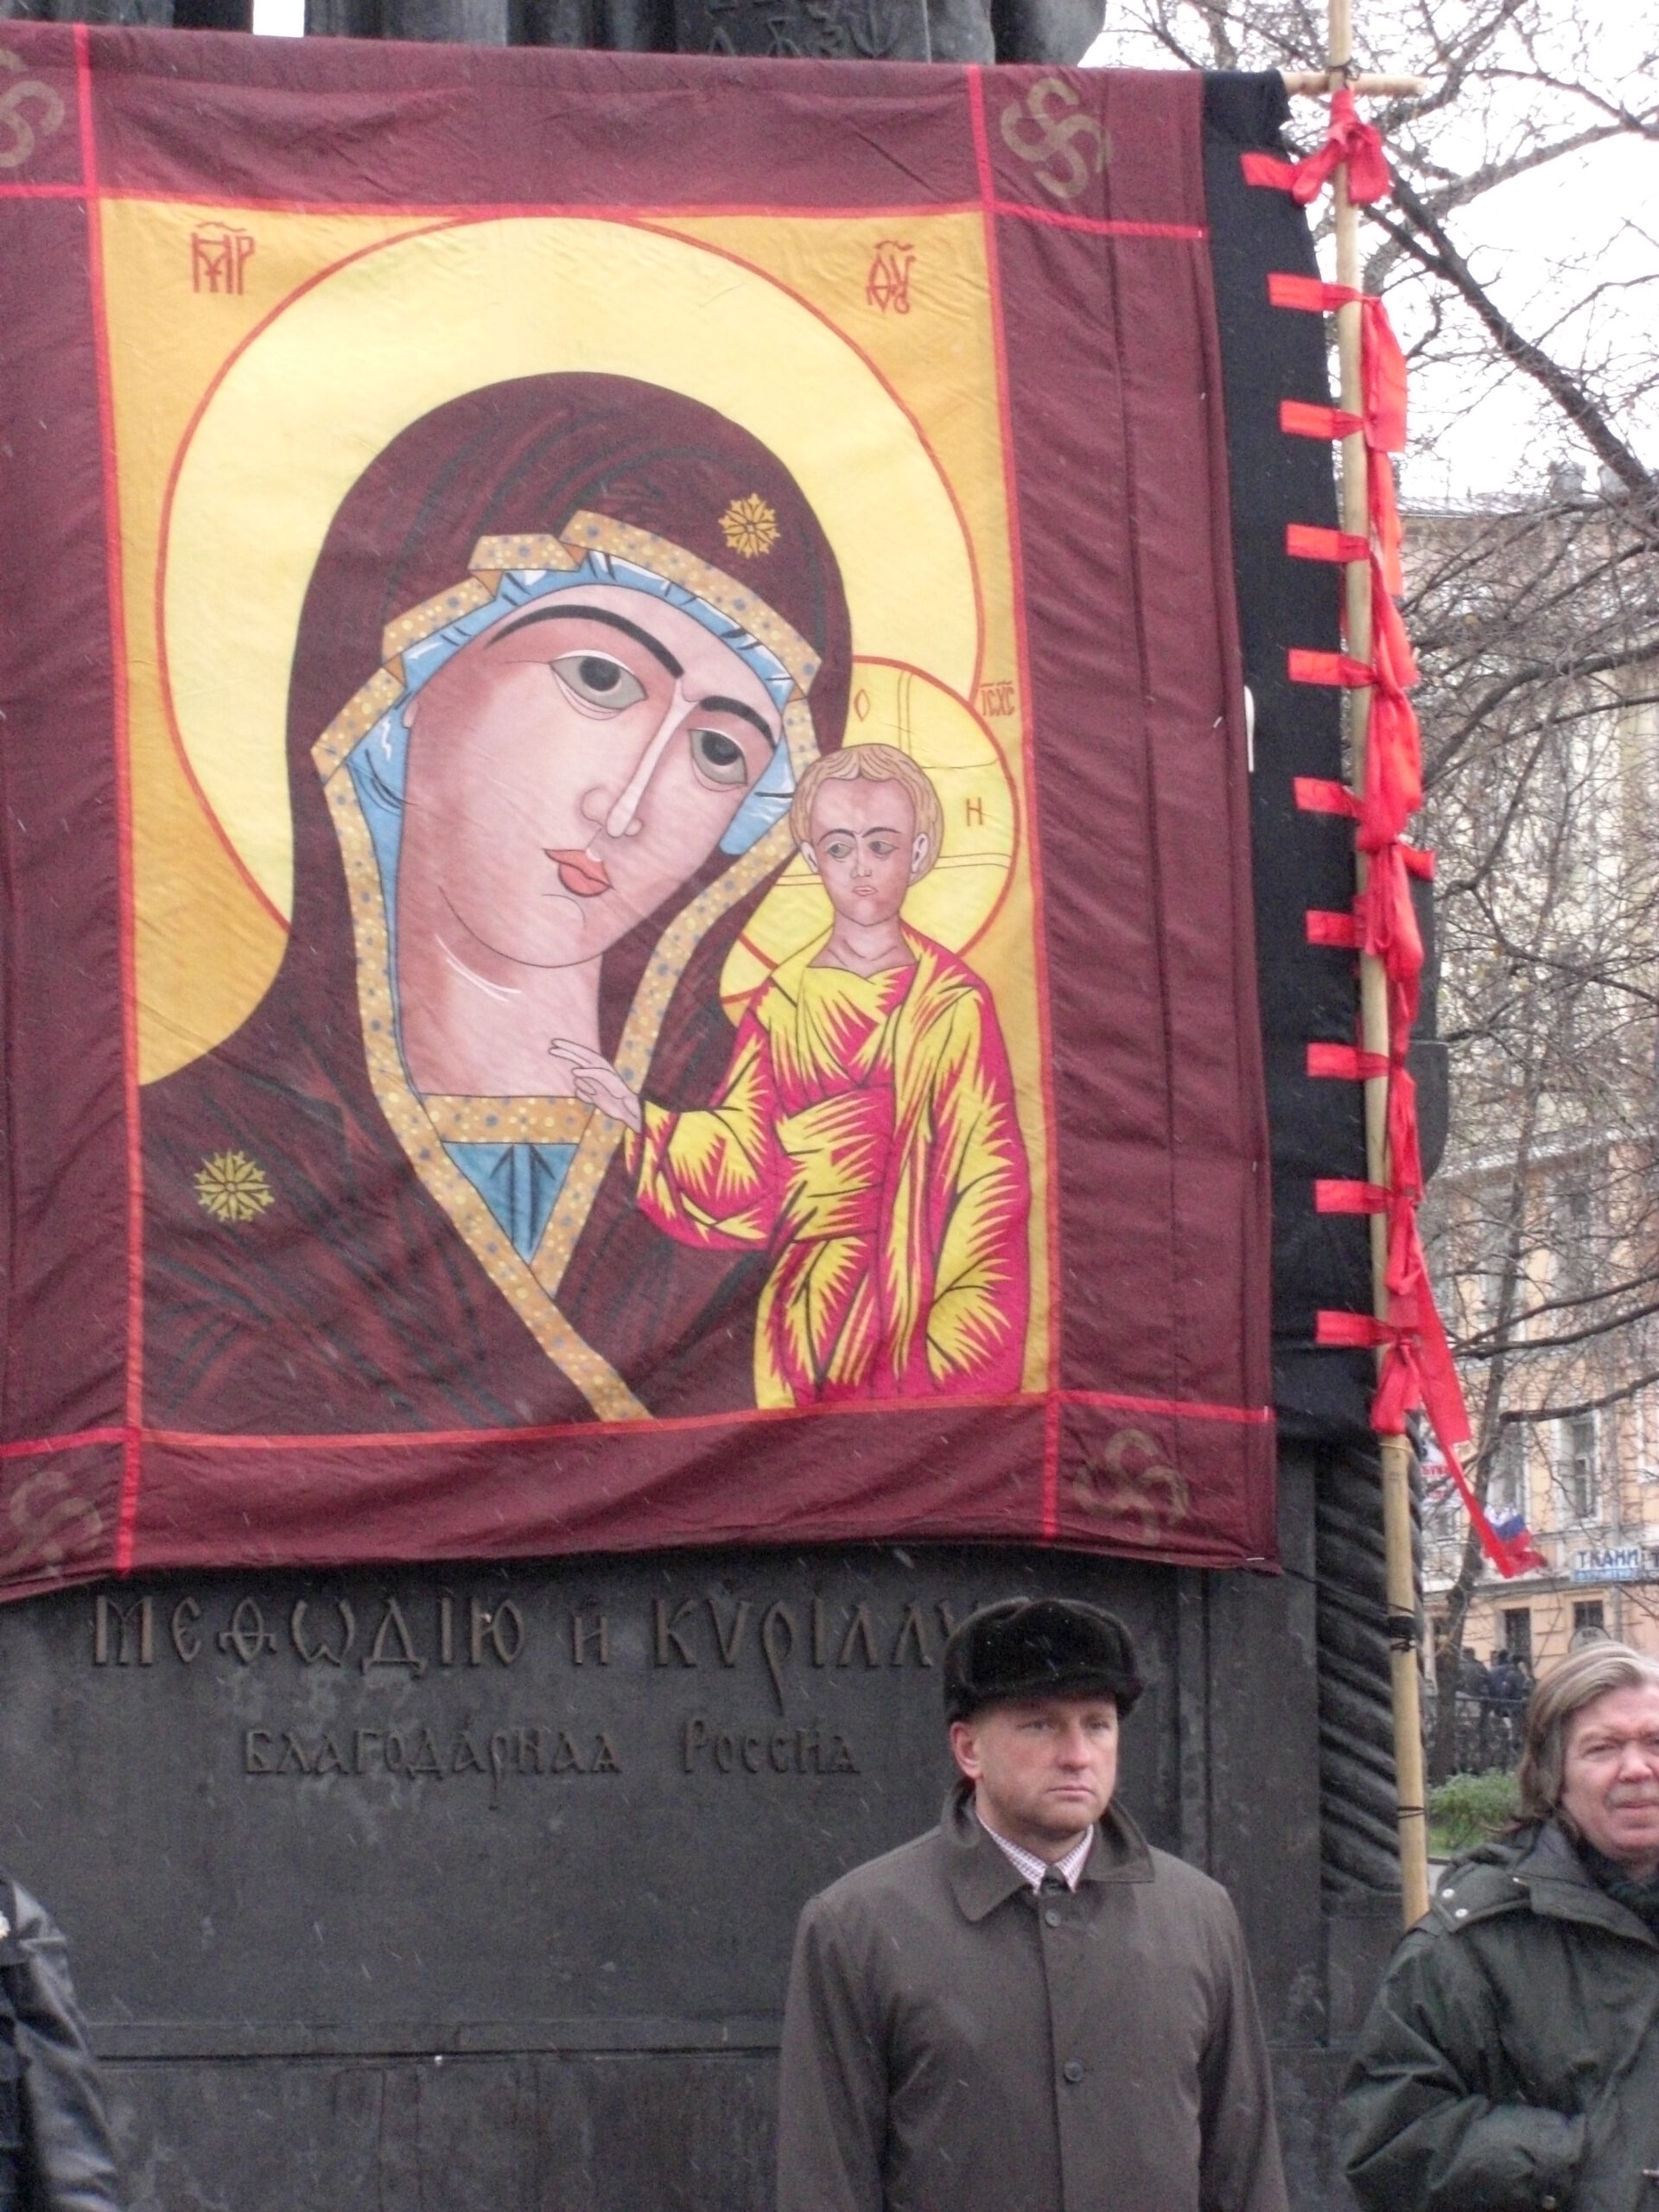 Marlene Laruelle – Ideological Complementary or Competition? The Kremlin, the Church, and the Monarchist Idea in Today’s Russia